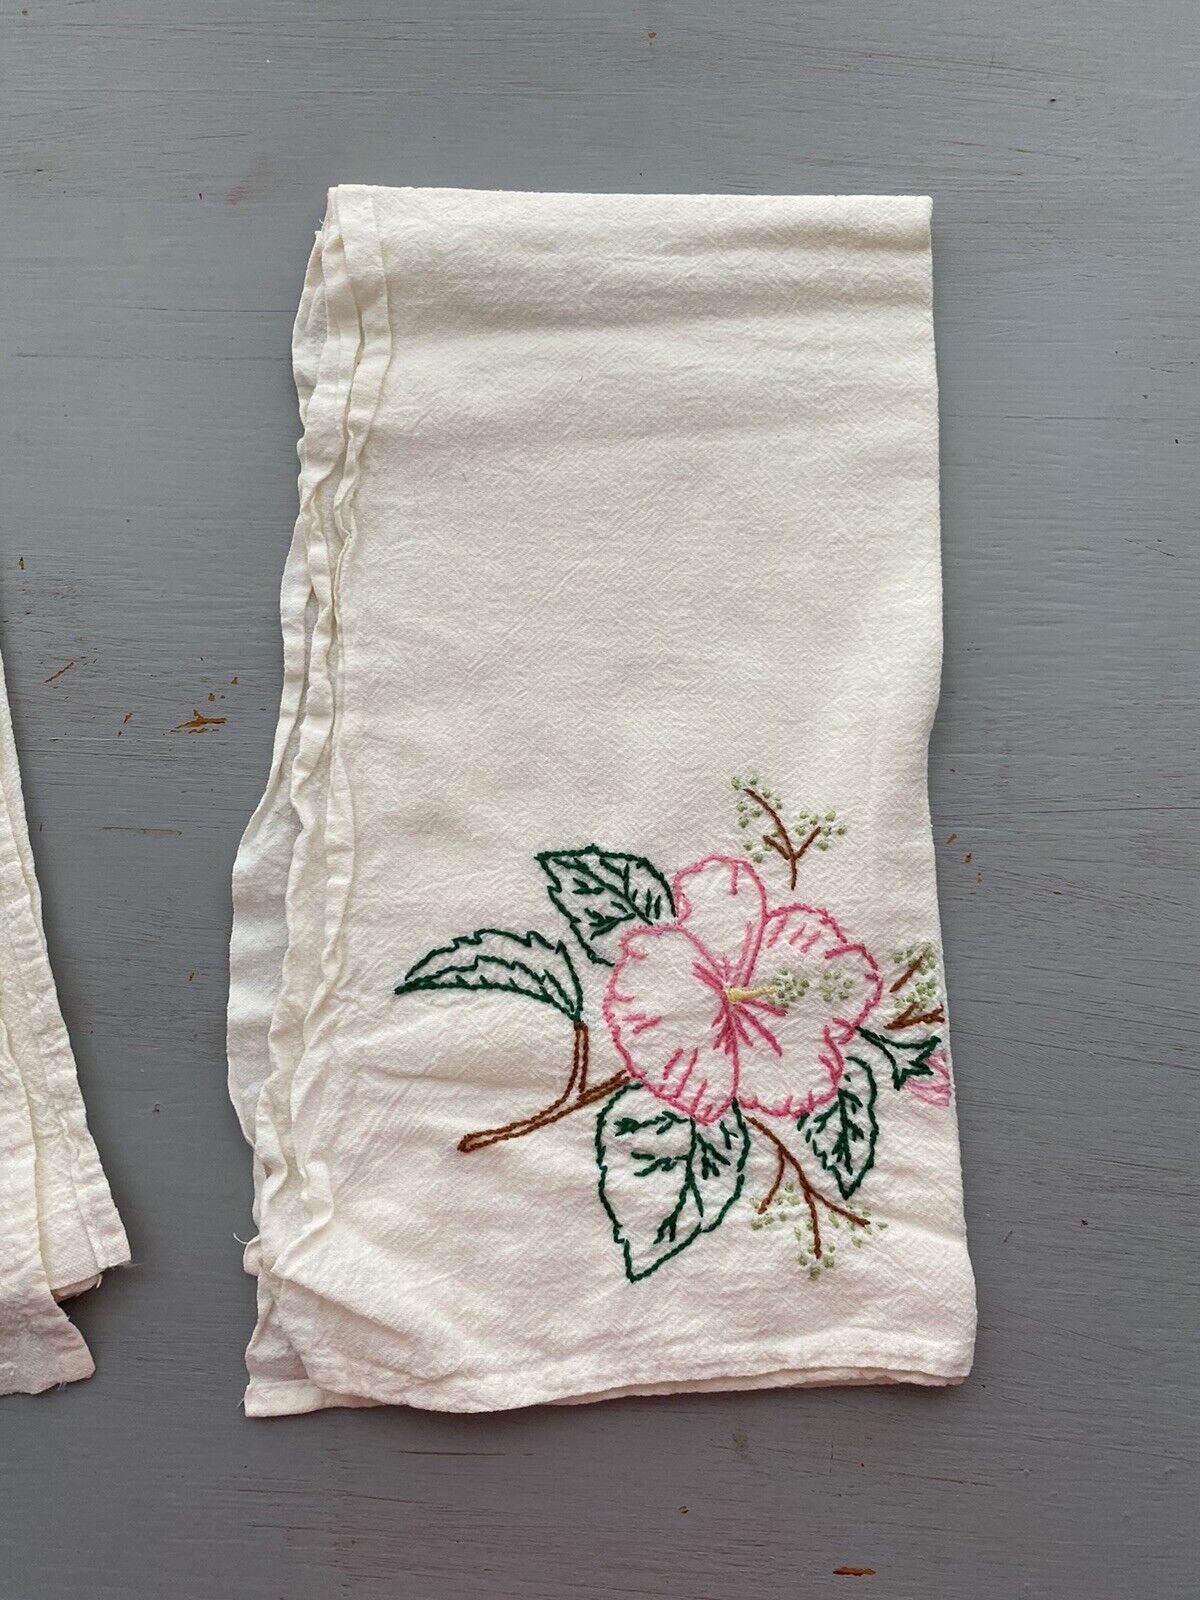 3 Hand Embroidered Floral tea towels With Floral Designs. 25 x 25 Inches